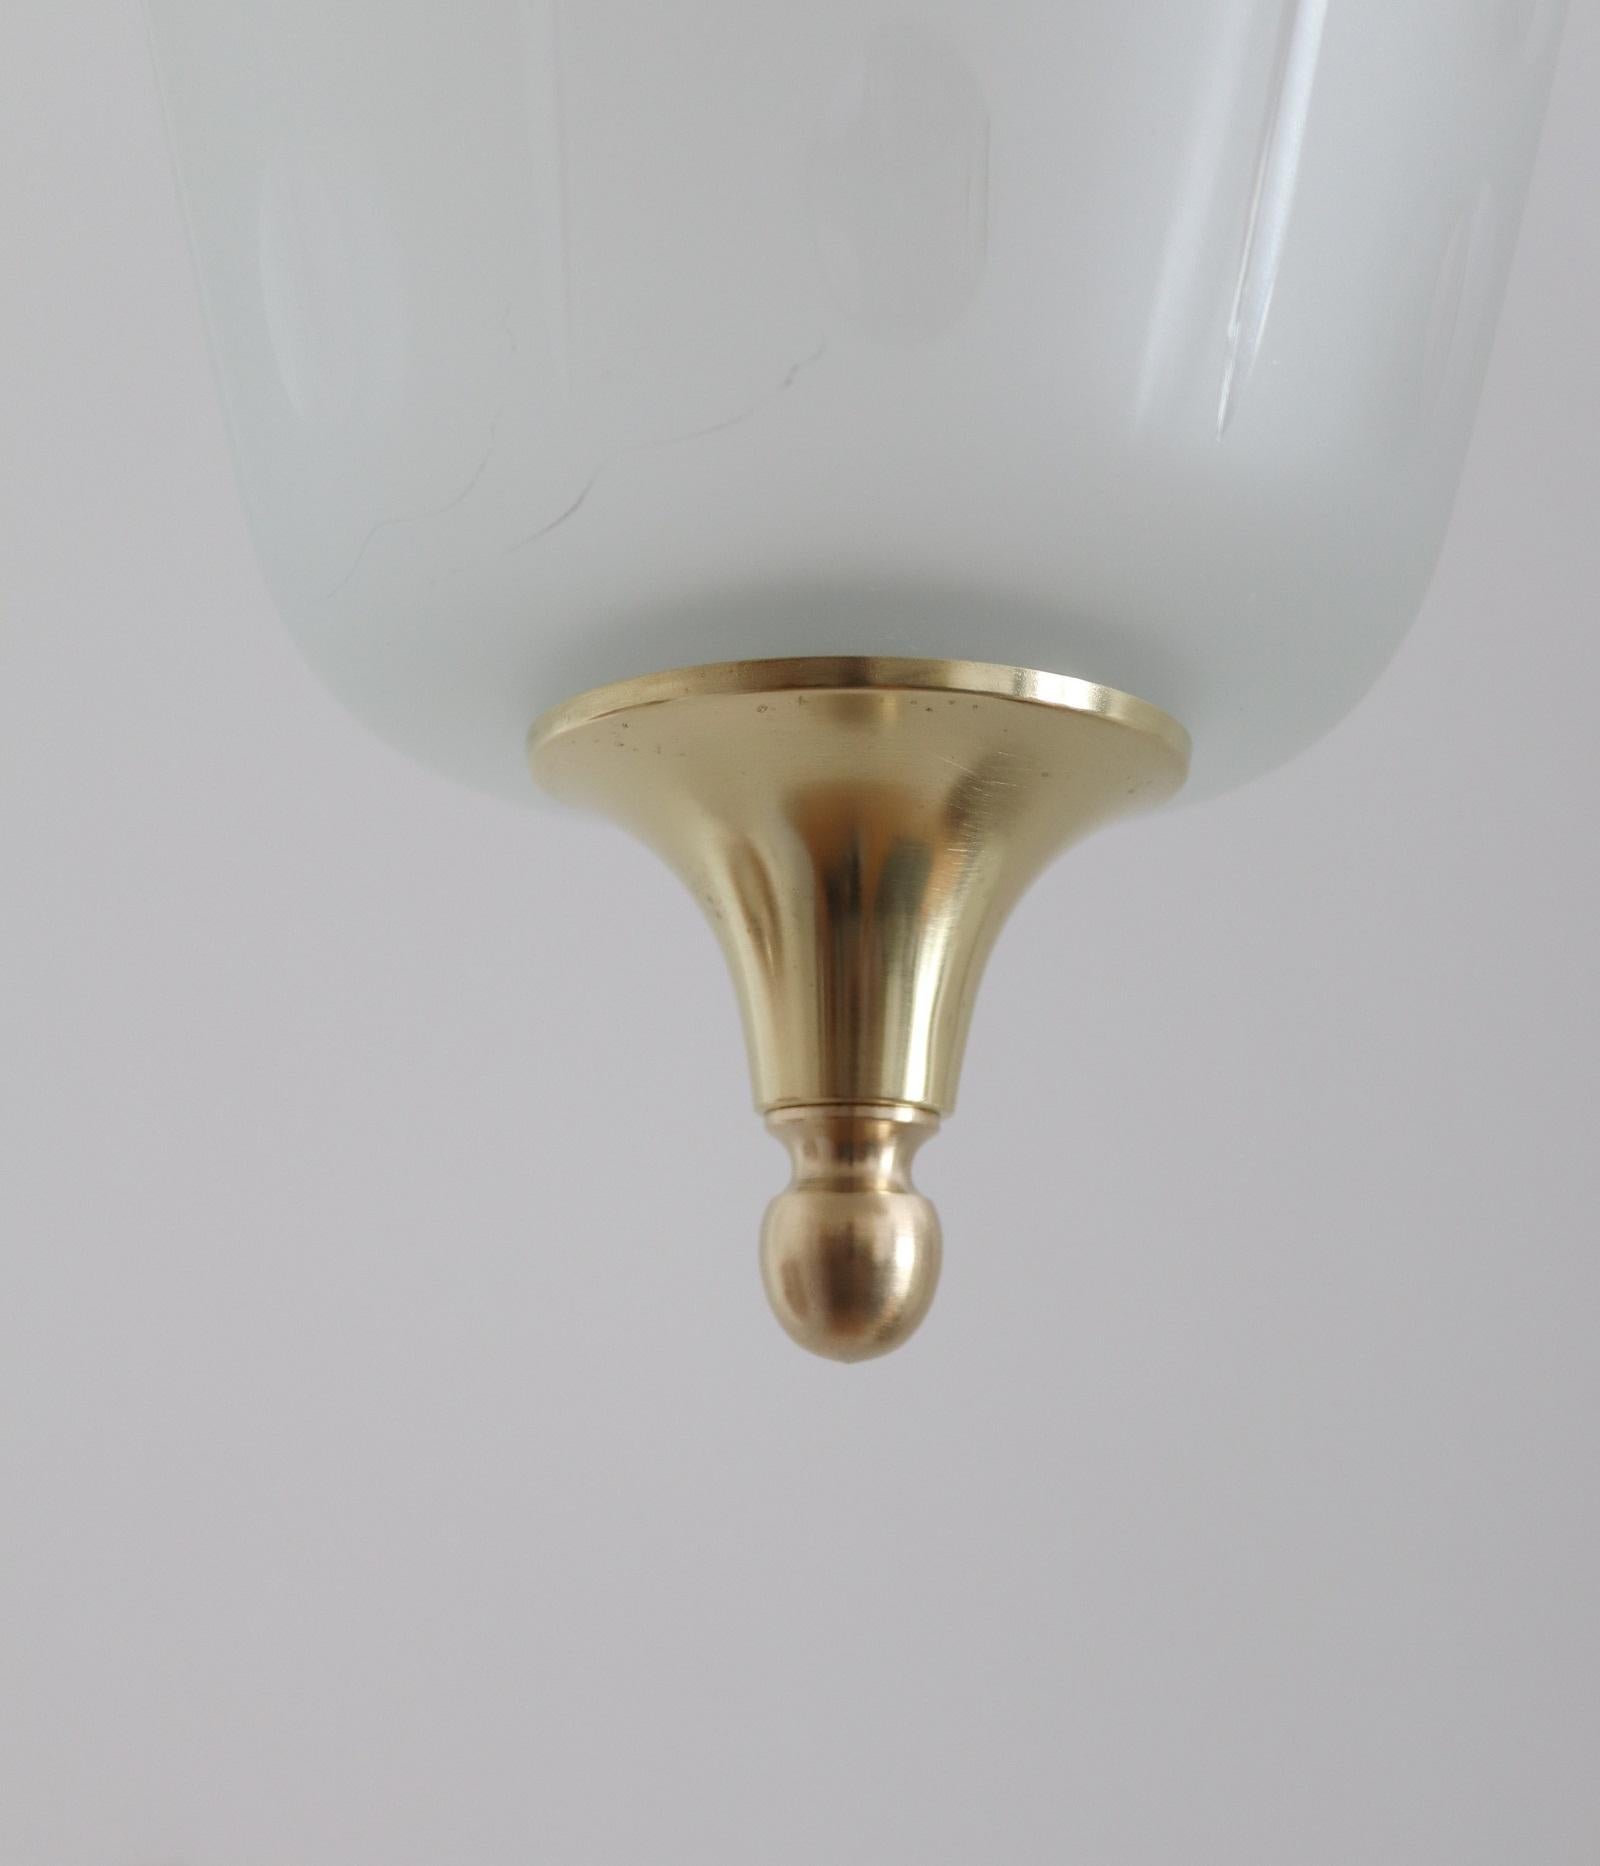 Italian Midcentury Brass and Cut Glass Pendant Lamp or Lantern, 1970s For Sale 1